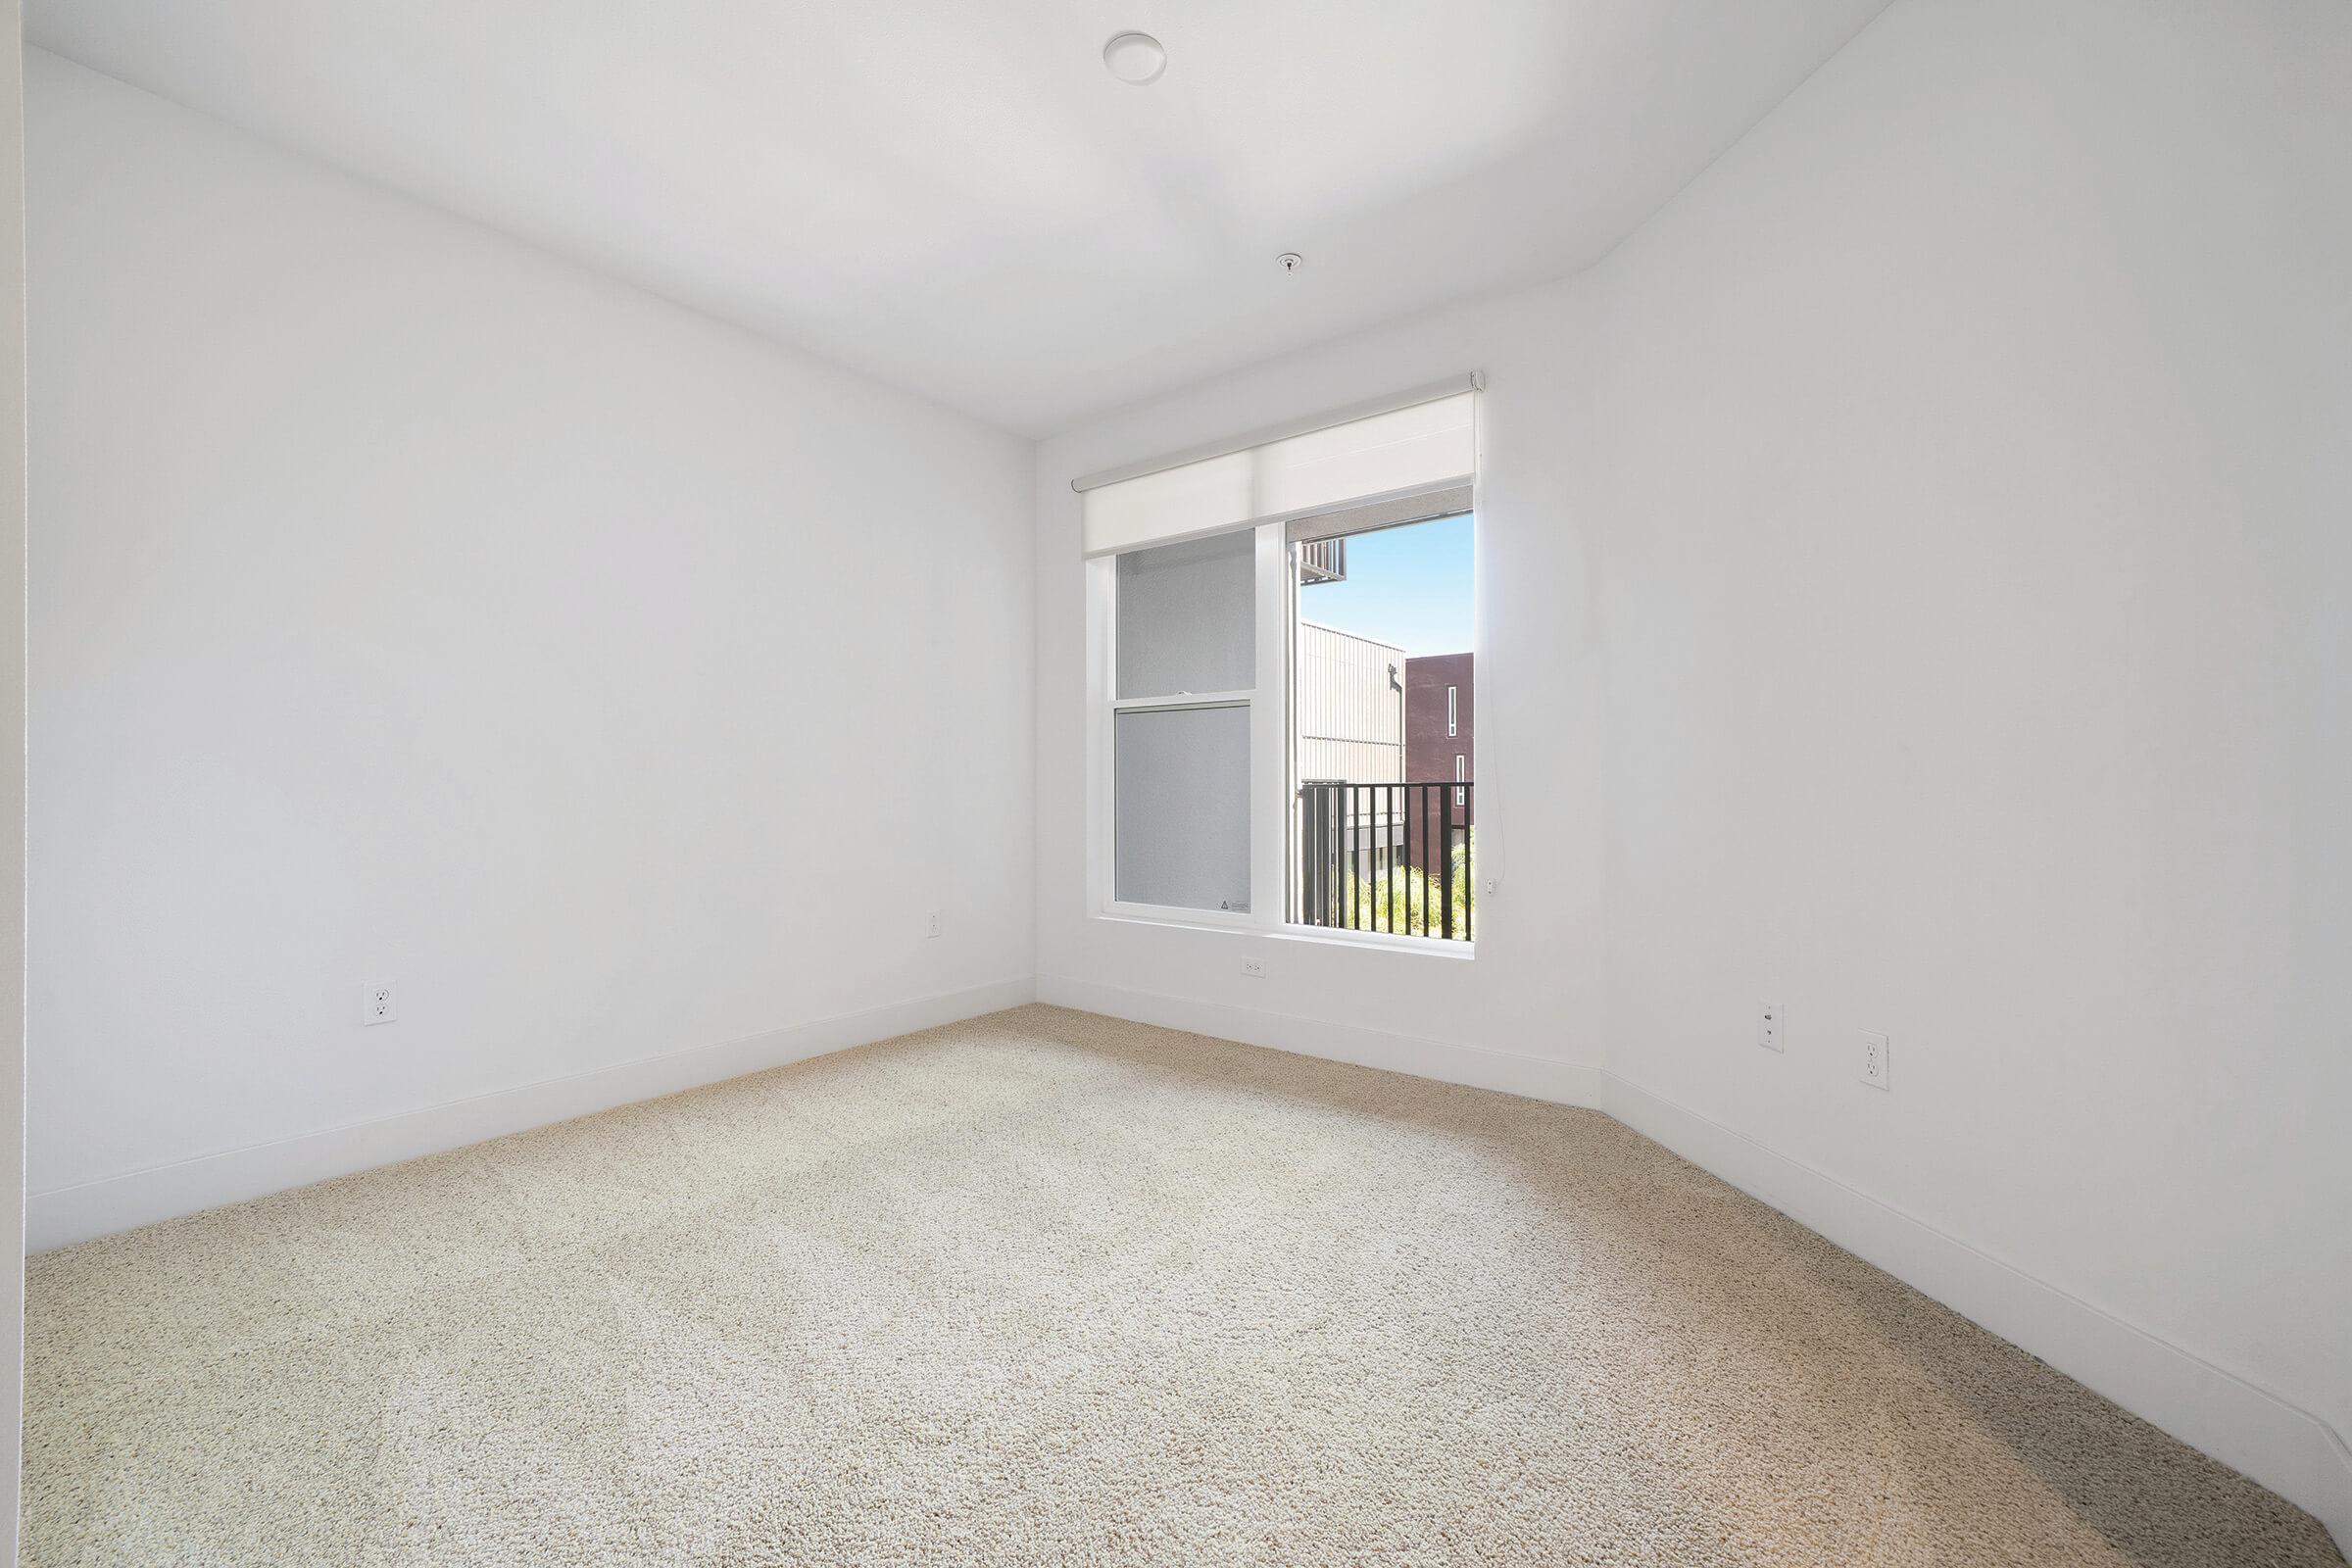 Unfurnished carpeted bedroom with open window